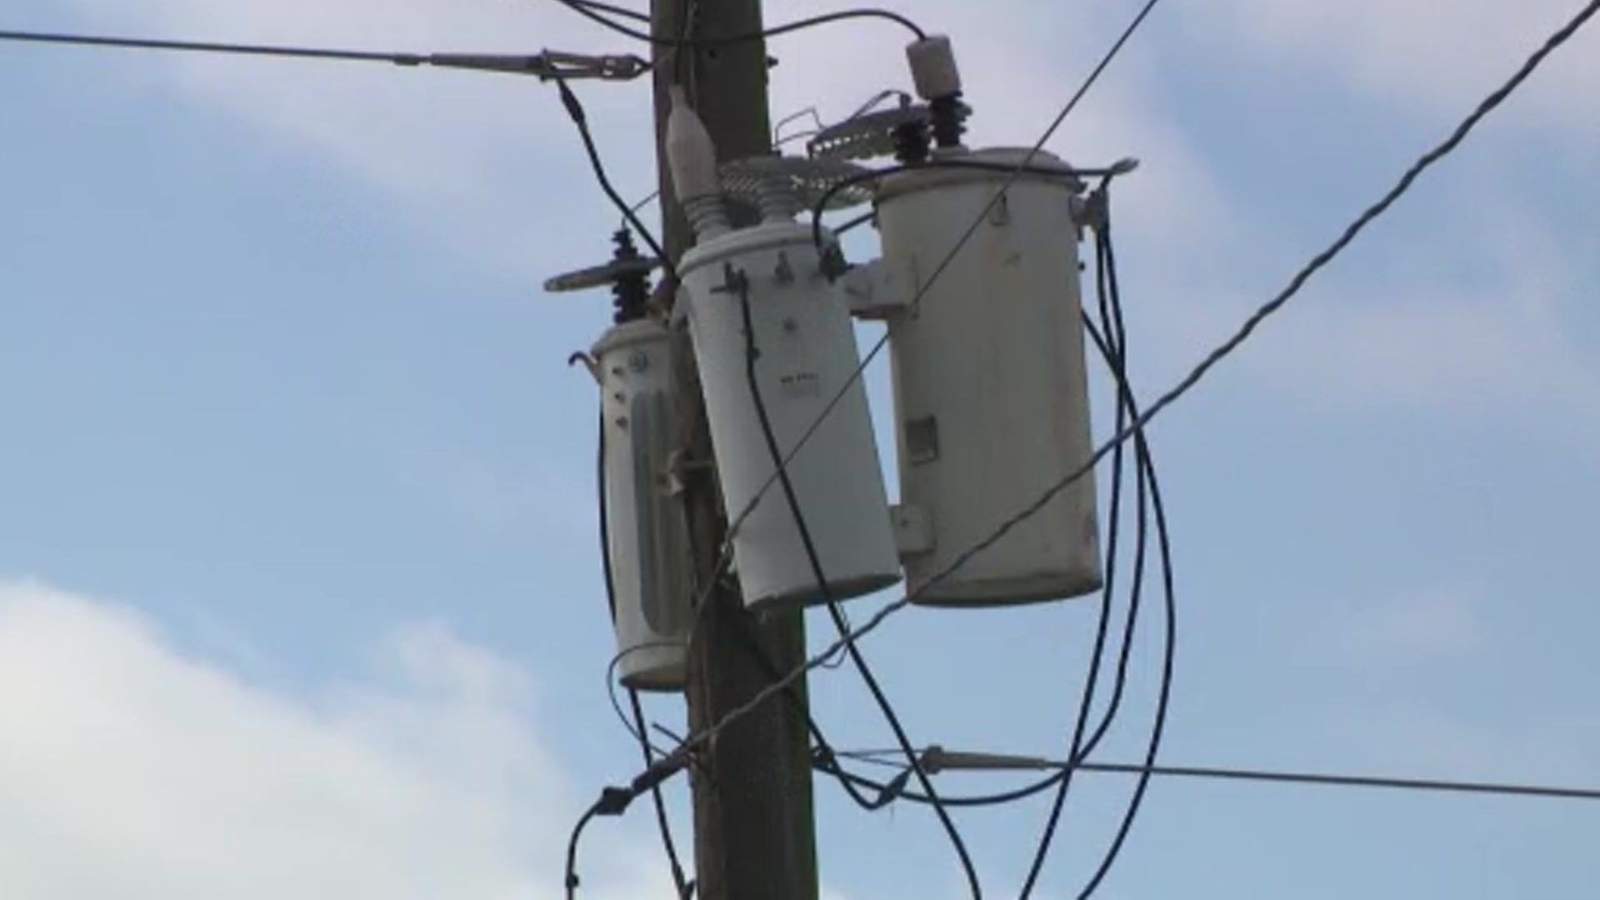 ERCOT says limited interruptions are still possible at night due to snow, cold temperatures